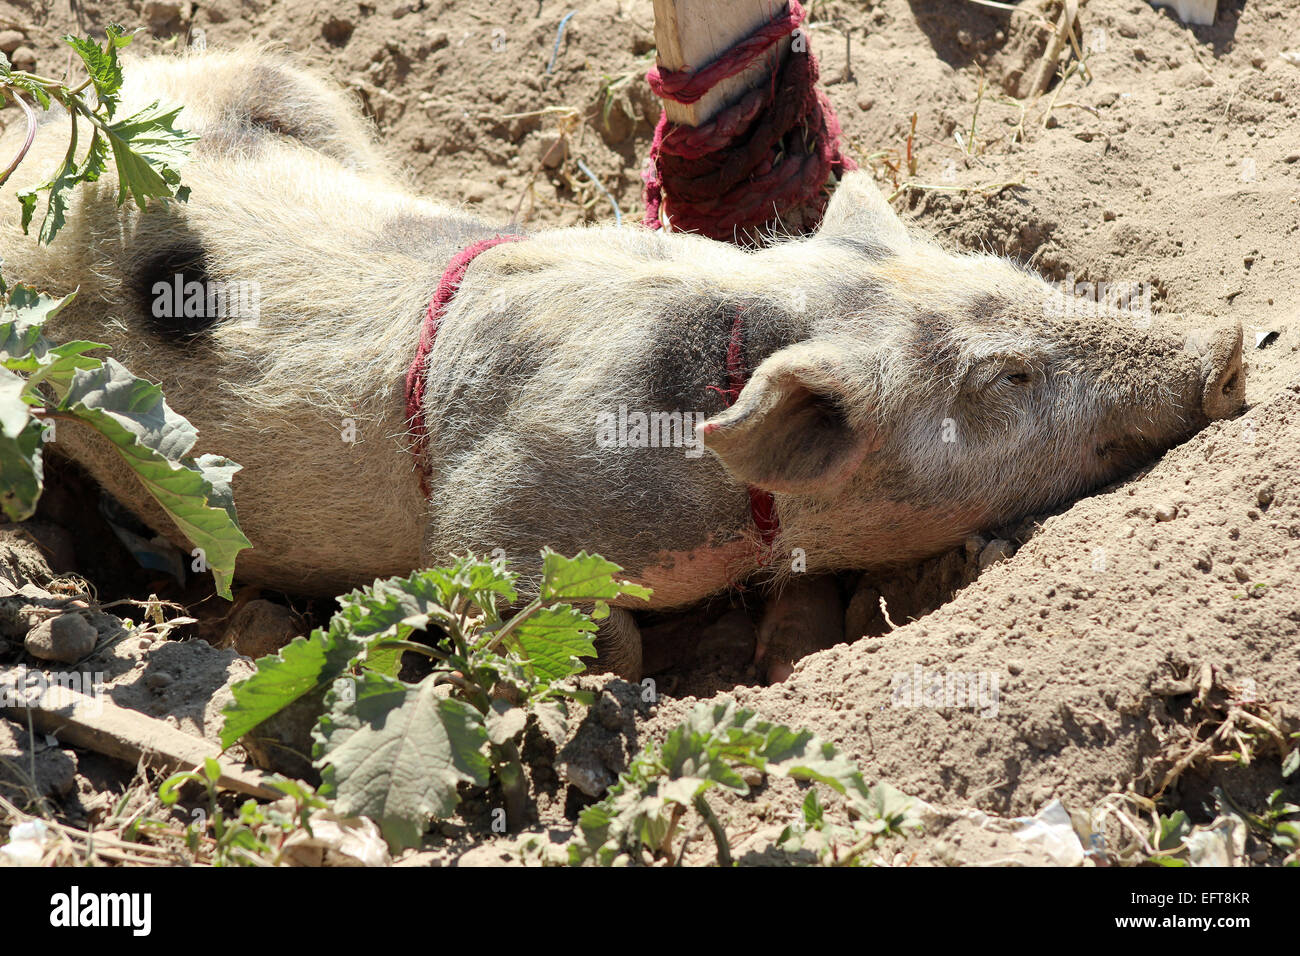 A pig wallowing in mud on a farm in Cotacachi, Ecuador Stock Photo